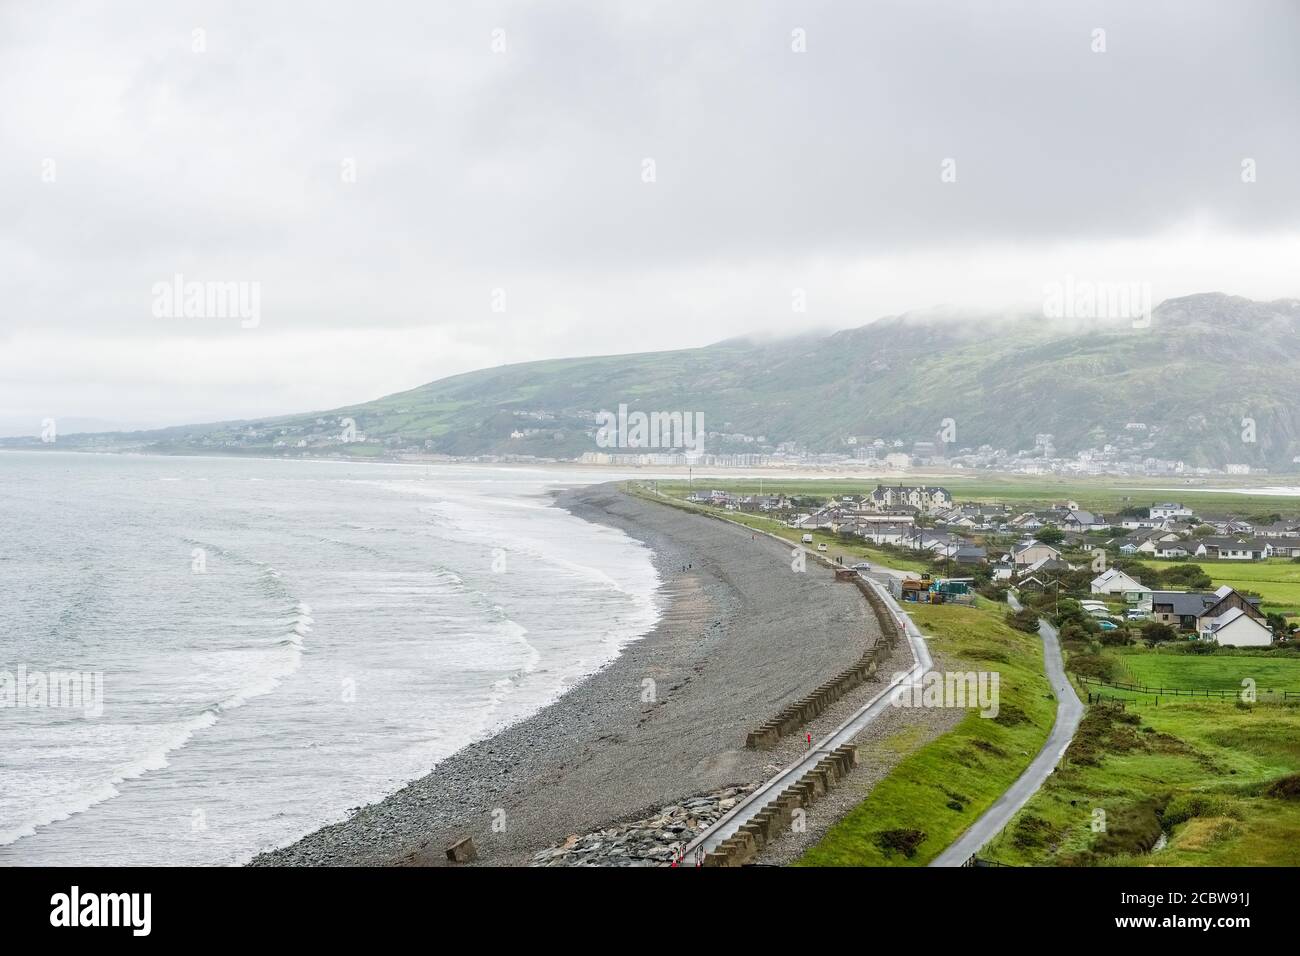 Fairborne near Barmouth, Gwynedd, Wales. The village has been designated for 'managed retreat' ie is not sustainable against rising sea levels Stock Photo